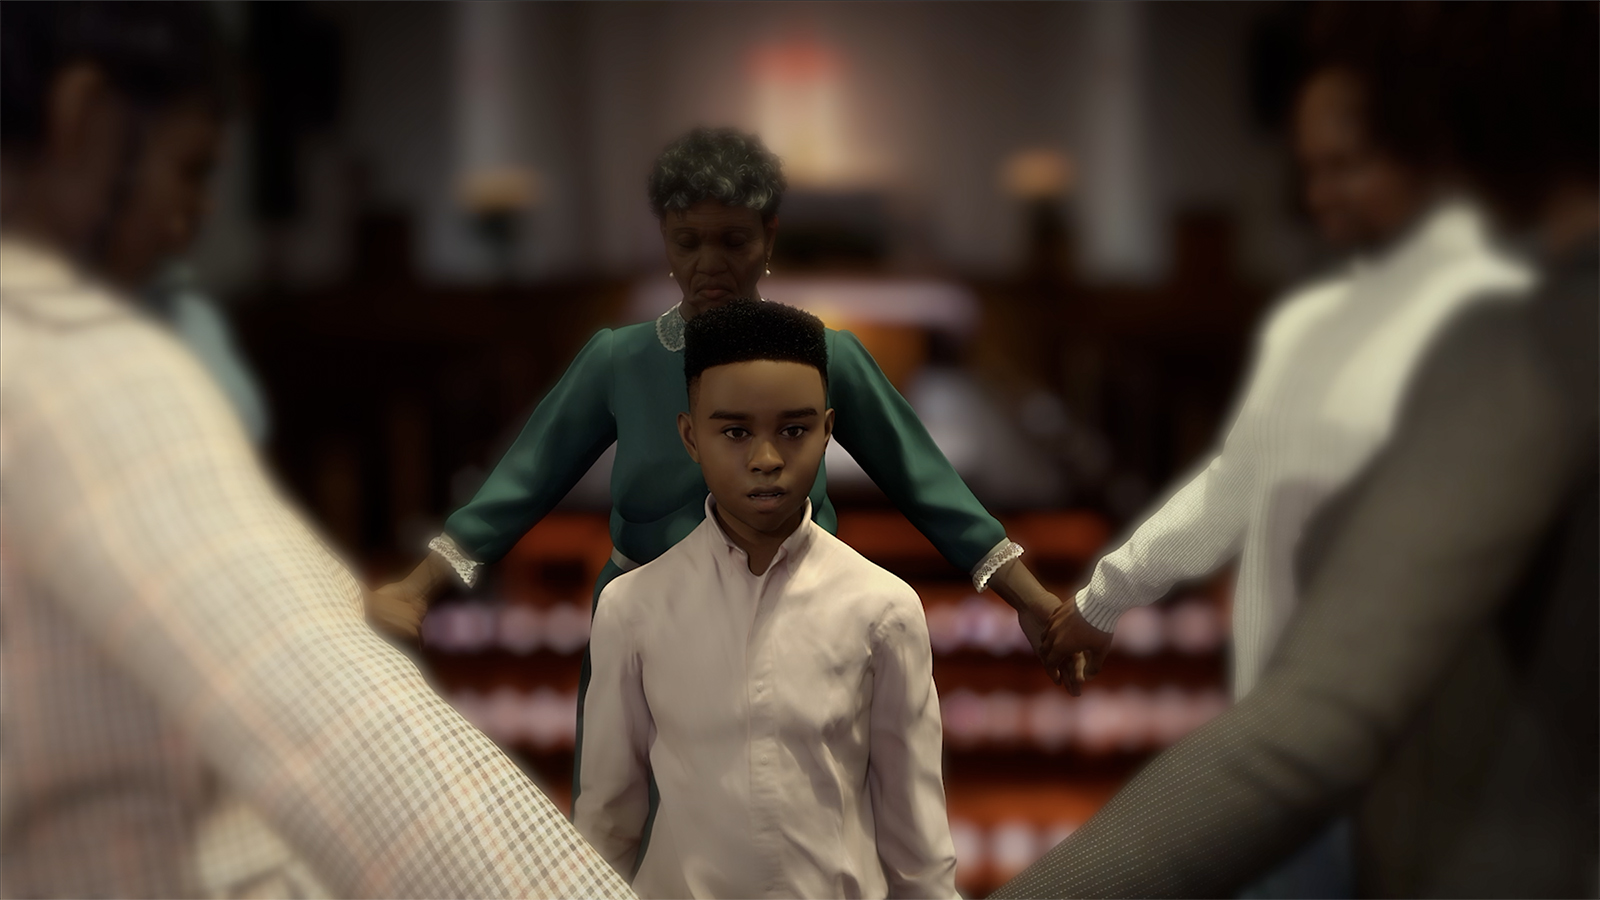 A still from the documentary “gOD-Talk: A Black Millennials and Faith Conversation." (Animation by Kyle Yearwood. Courtesy of the National Museum of African American History and Culture)